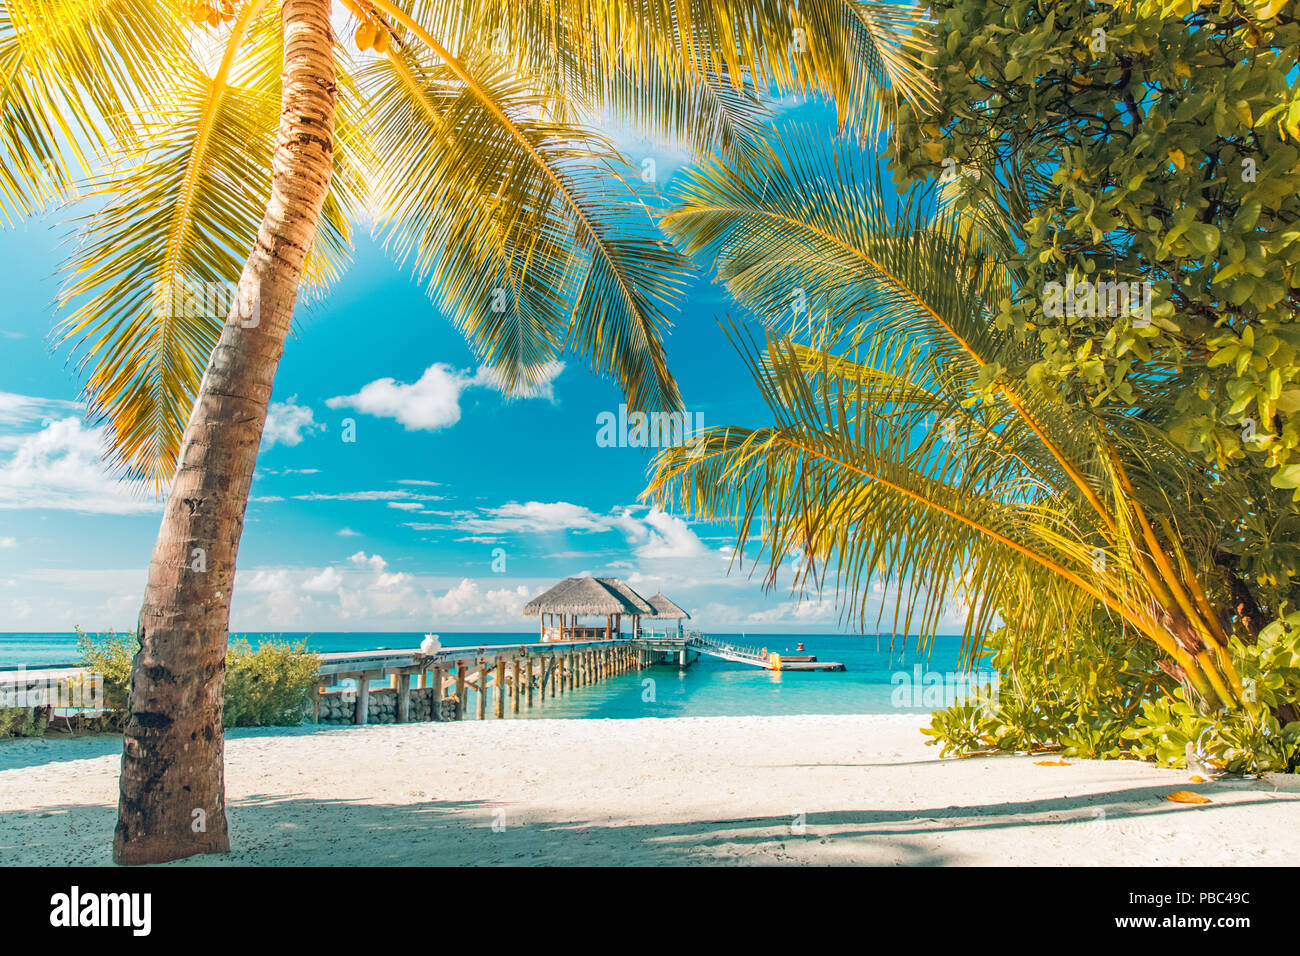 Beautiful Beach Summer Holiday And Vacation Concept Background Inspirational Tropical Landscape Design Tourism And Travel Design Stock Photo Alamy